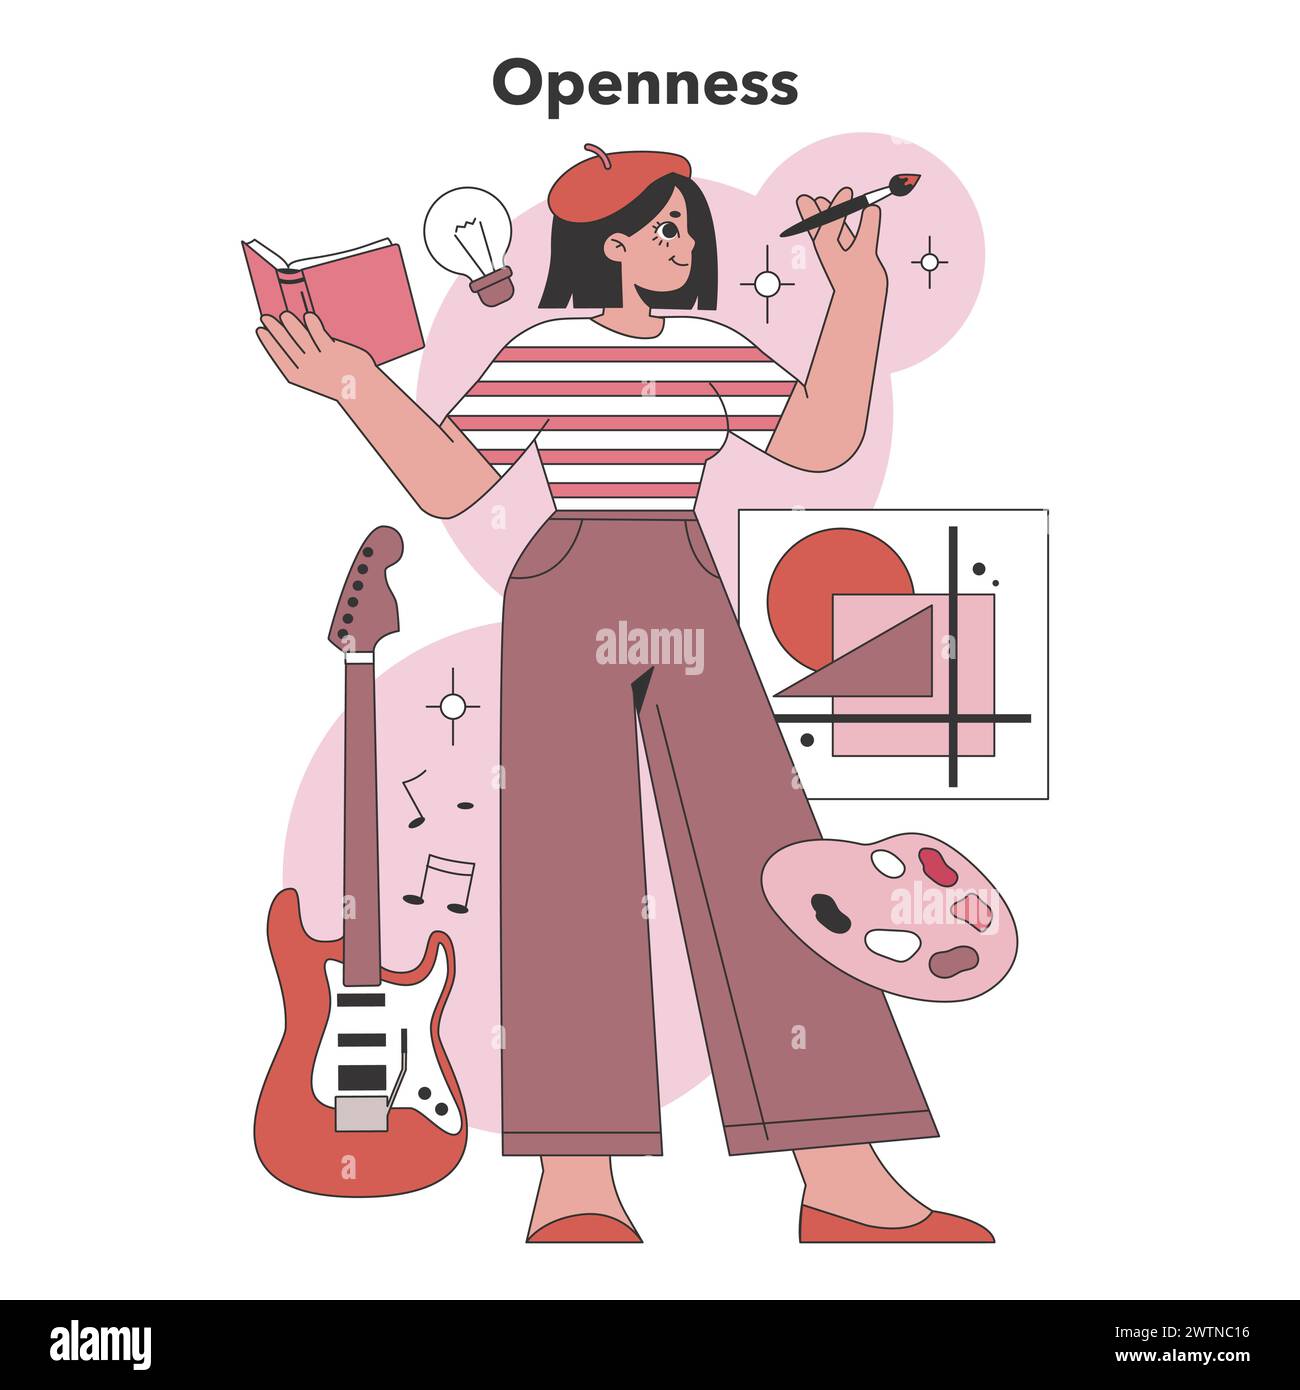 Openness trait in the Big Five Personality. Creative woman with various artistic symbols represents cognitive flexibility and aesthetic sensitivity. Flat vector illustration Stock Vector